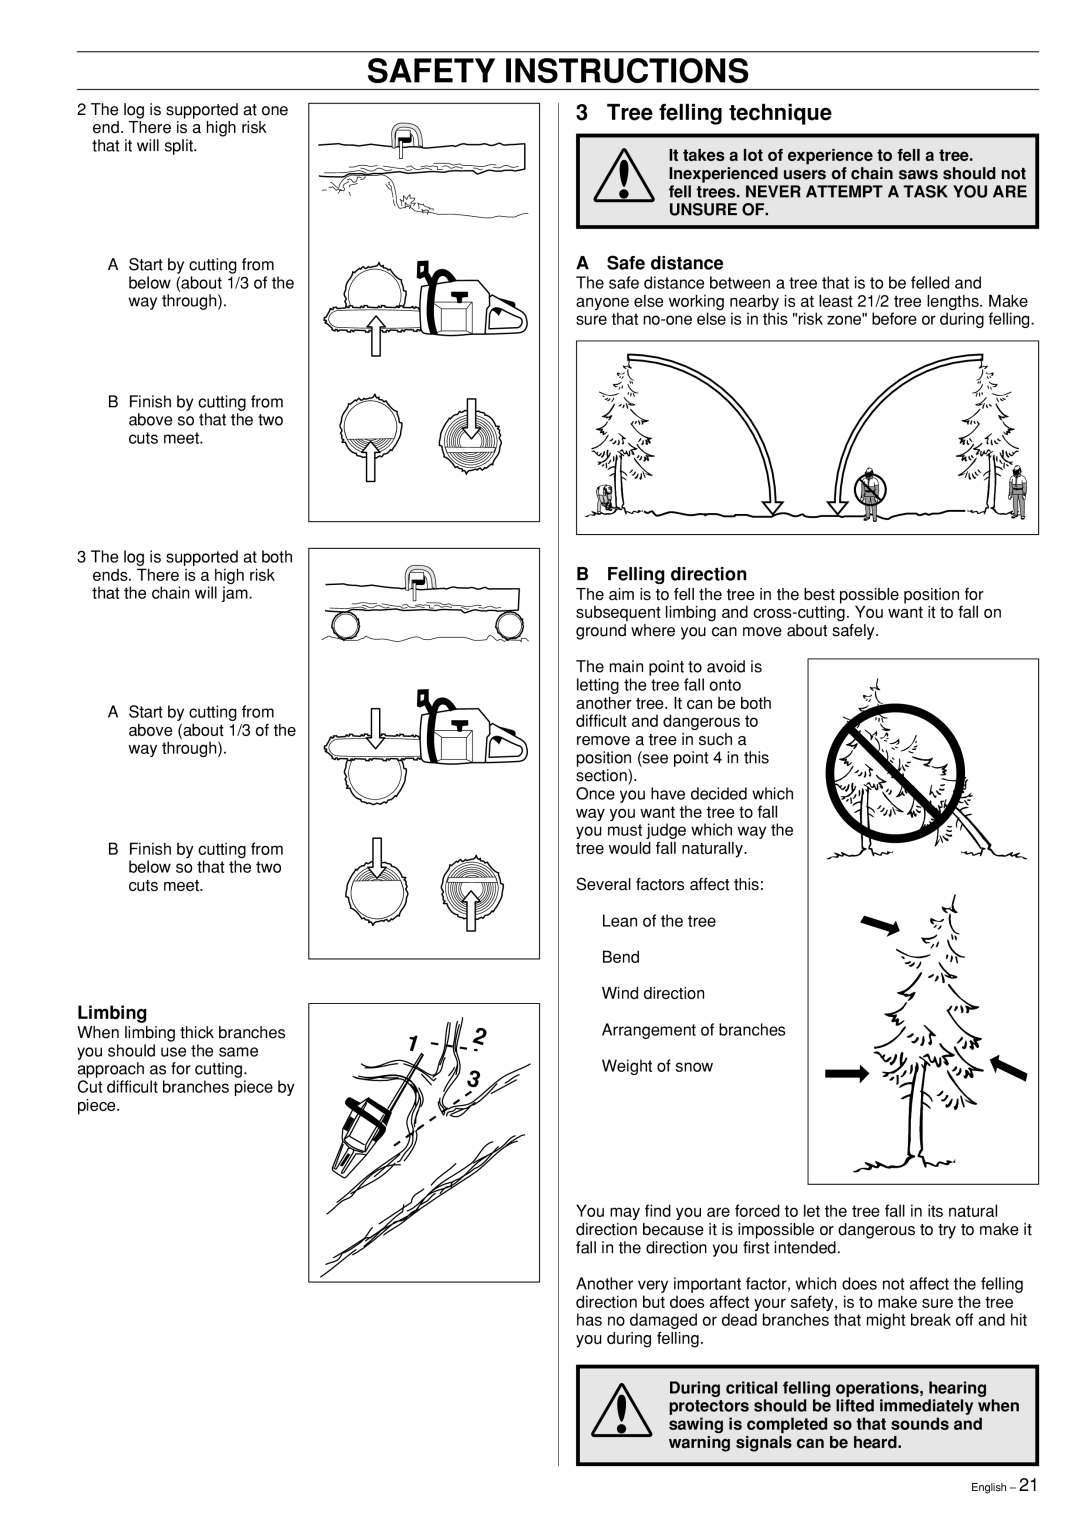 Husqvarna 55 Rancher manual Safety Instructions, Tree felling technique, A Safe distance, Limbing, B Felling direction 